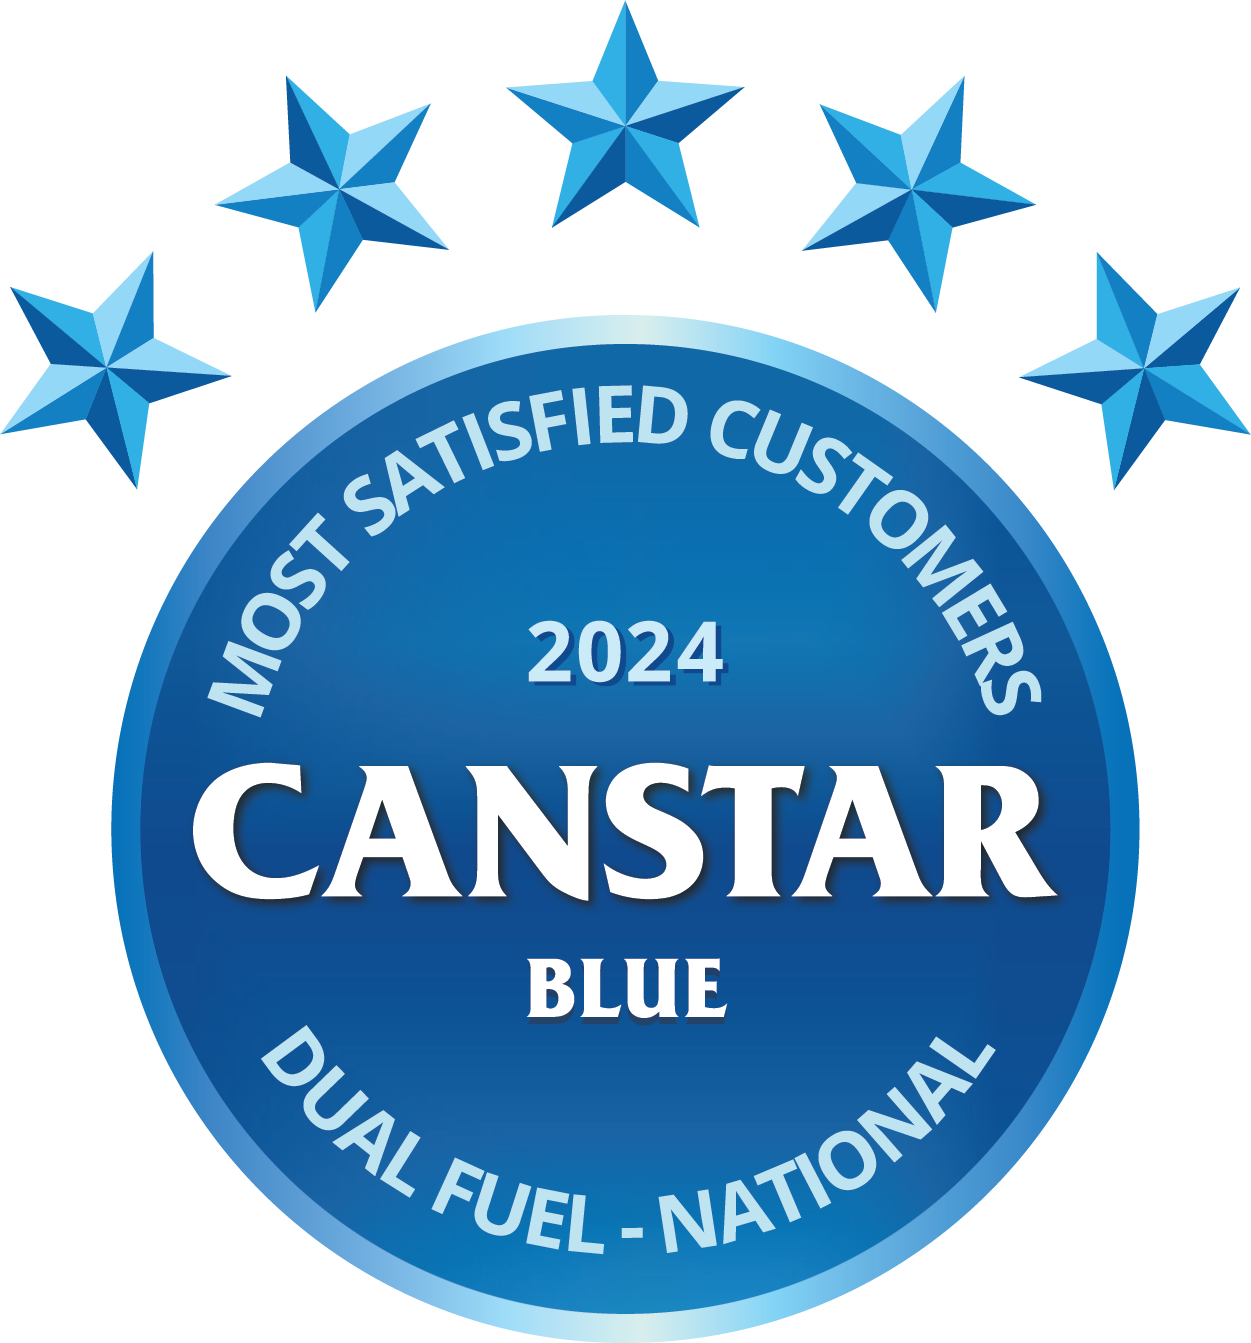 Most satisfied customers Dual fuel